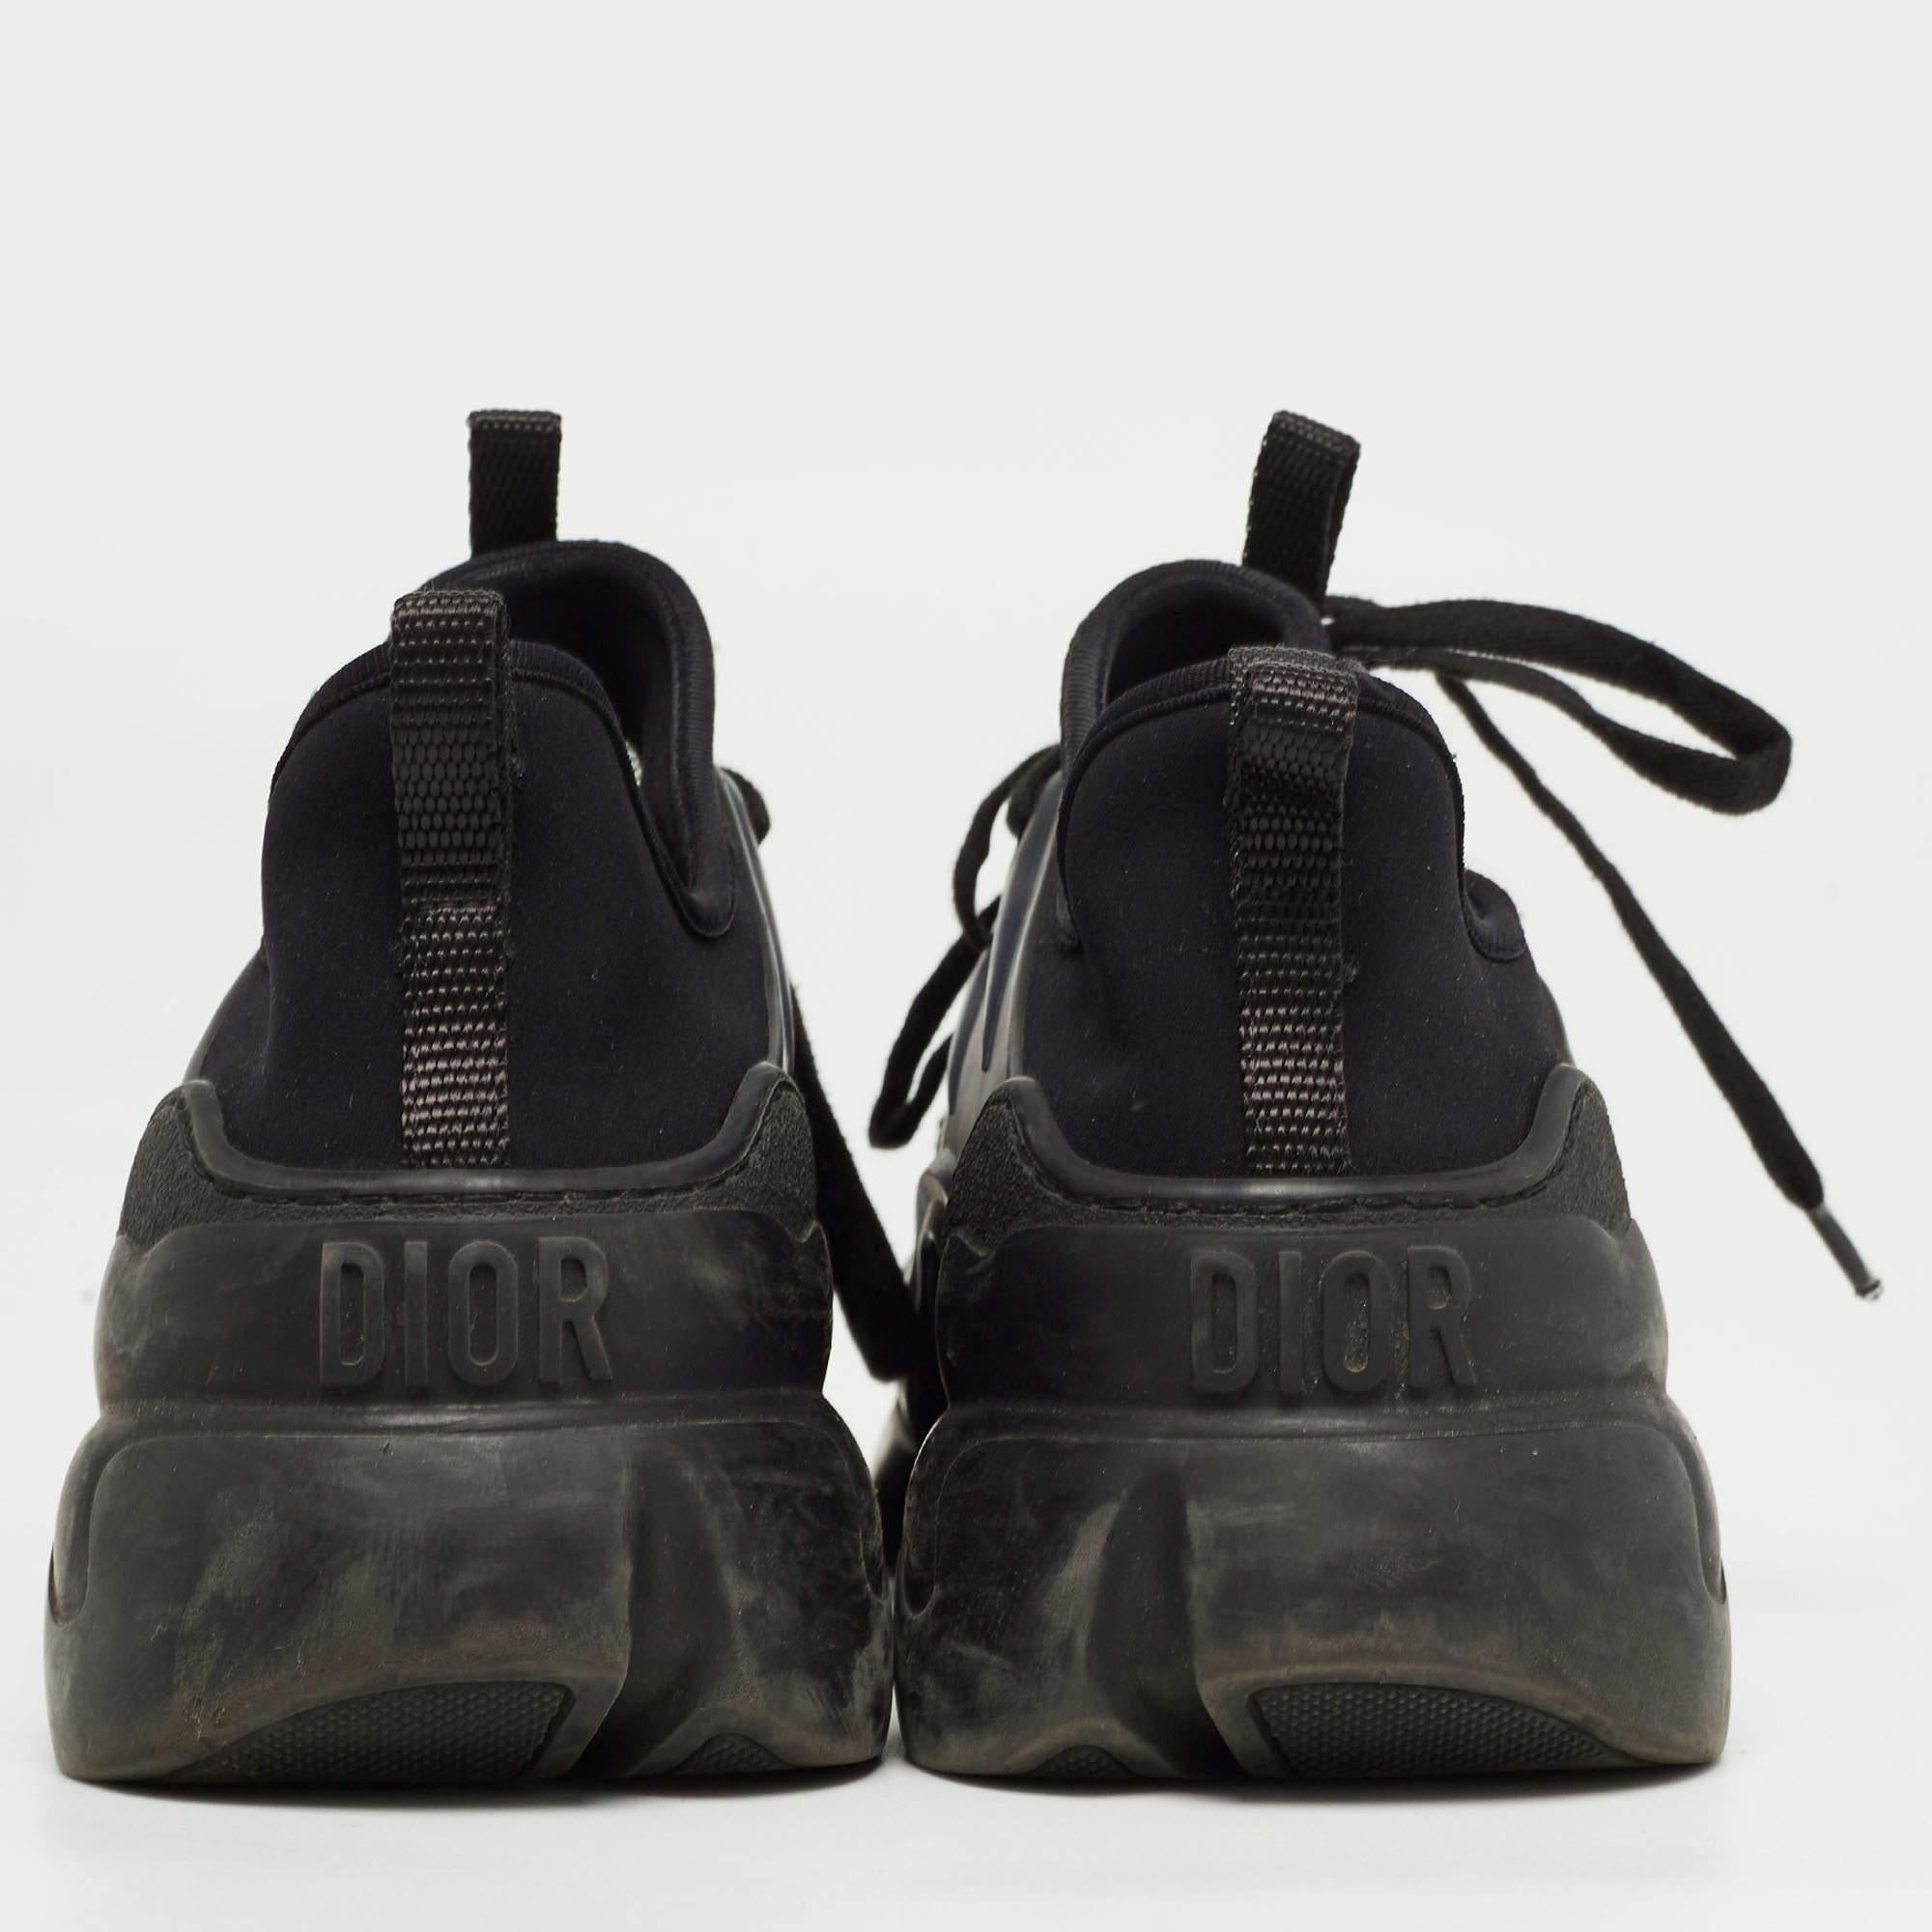 A great pick to elevate your street-style look, these trendy D-Connect sneakers from Dior feature an exterior made of PVC and neoprene into a chunky design with well-carved soles. While the brand name on the laces and counters adds a signature